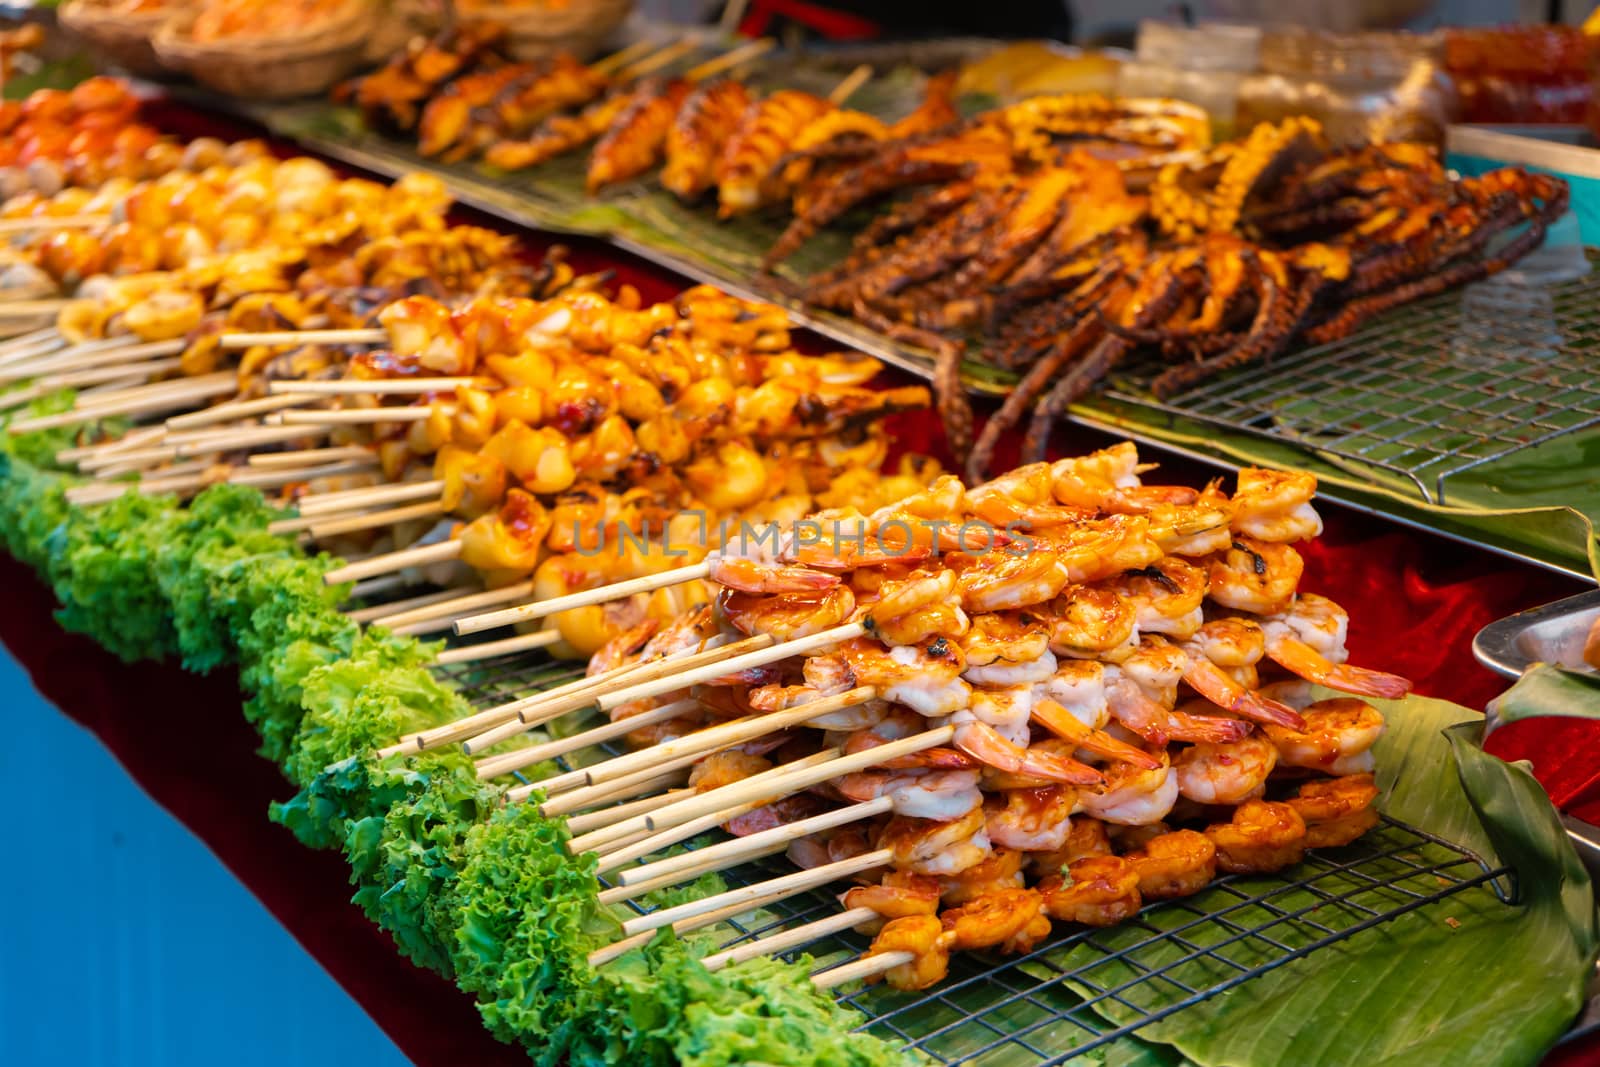 Street food market in Asia. Food counters, mini barbecue on a stick also called satey